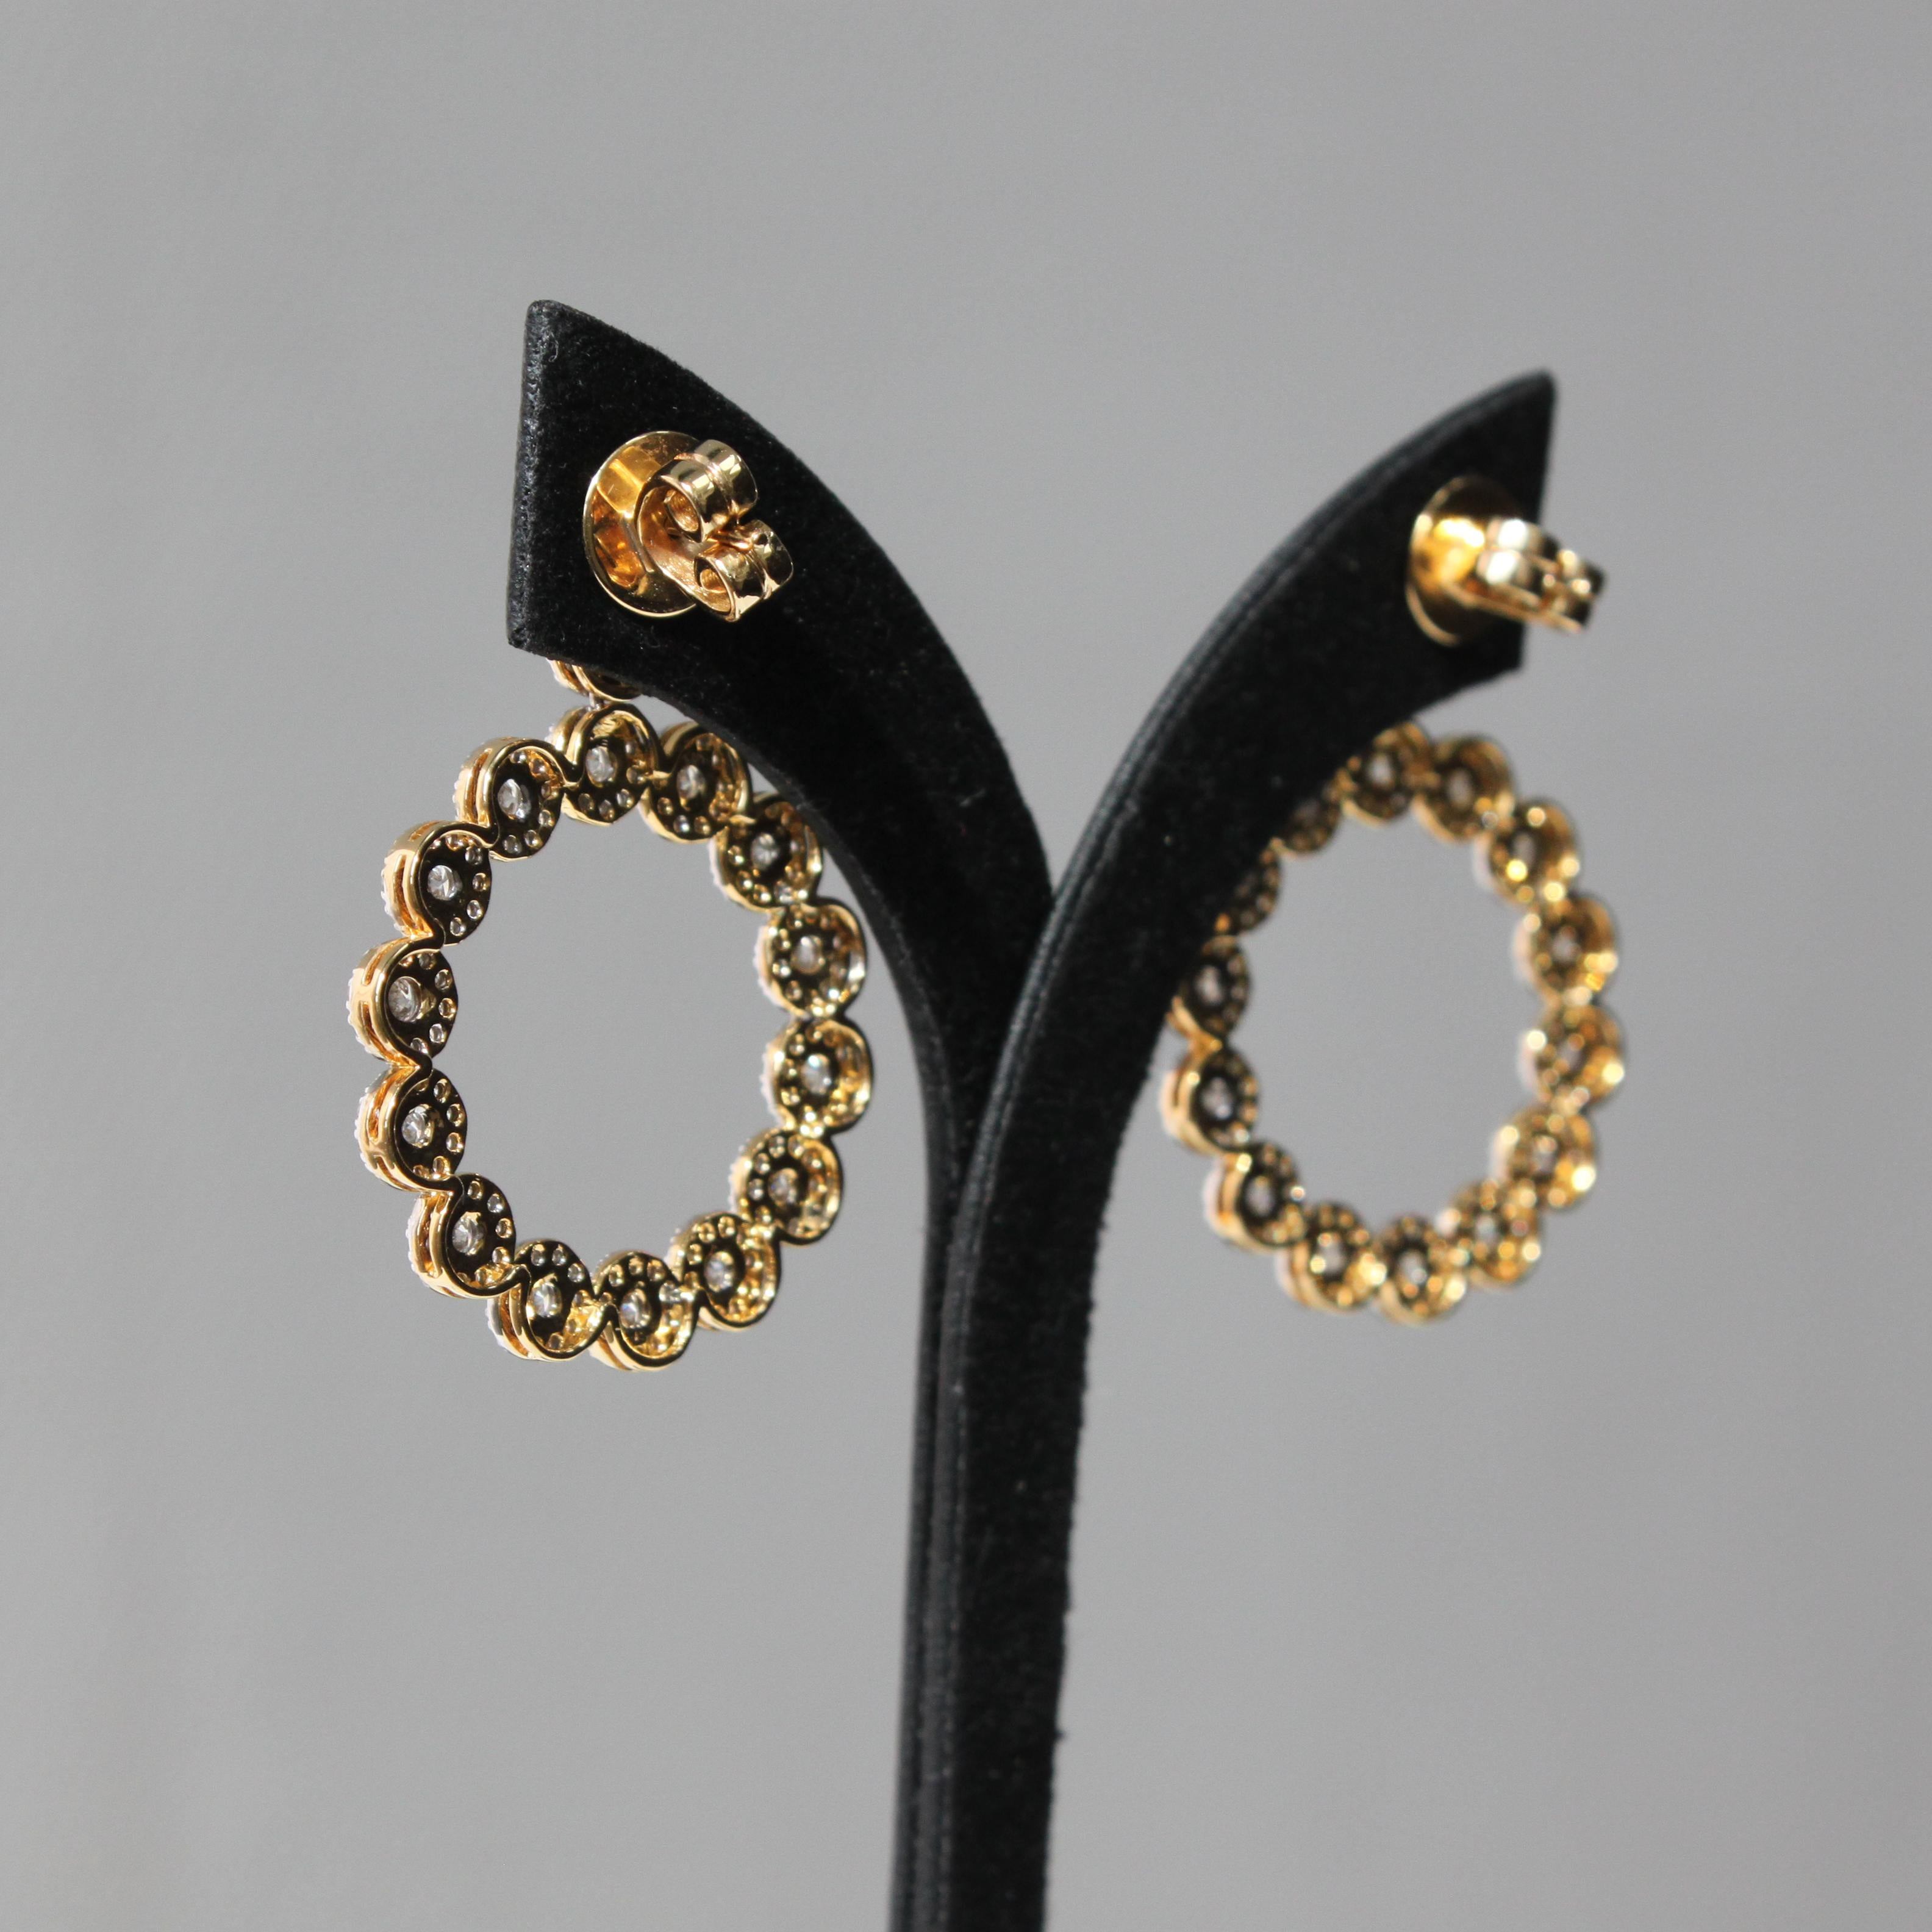 Brilliant Cut Cluster Diamond Earring in 14K gold - a dangling classic delight  For Sale